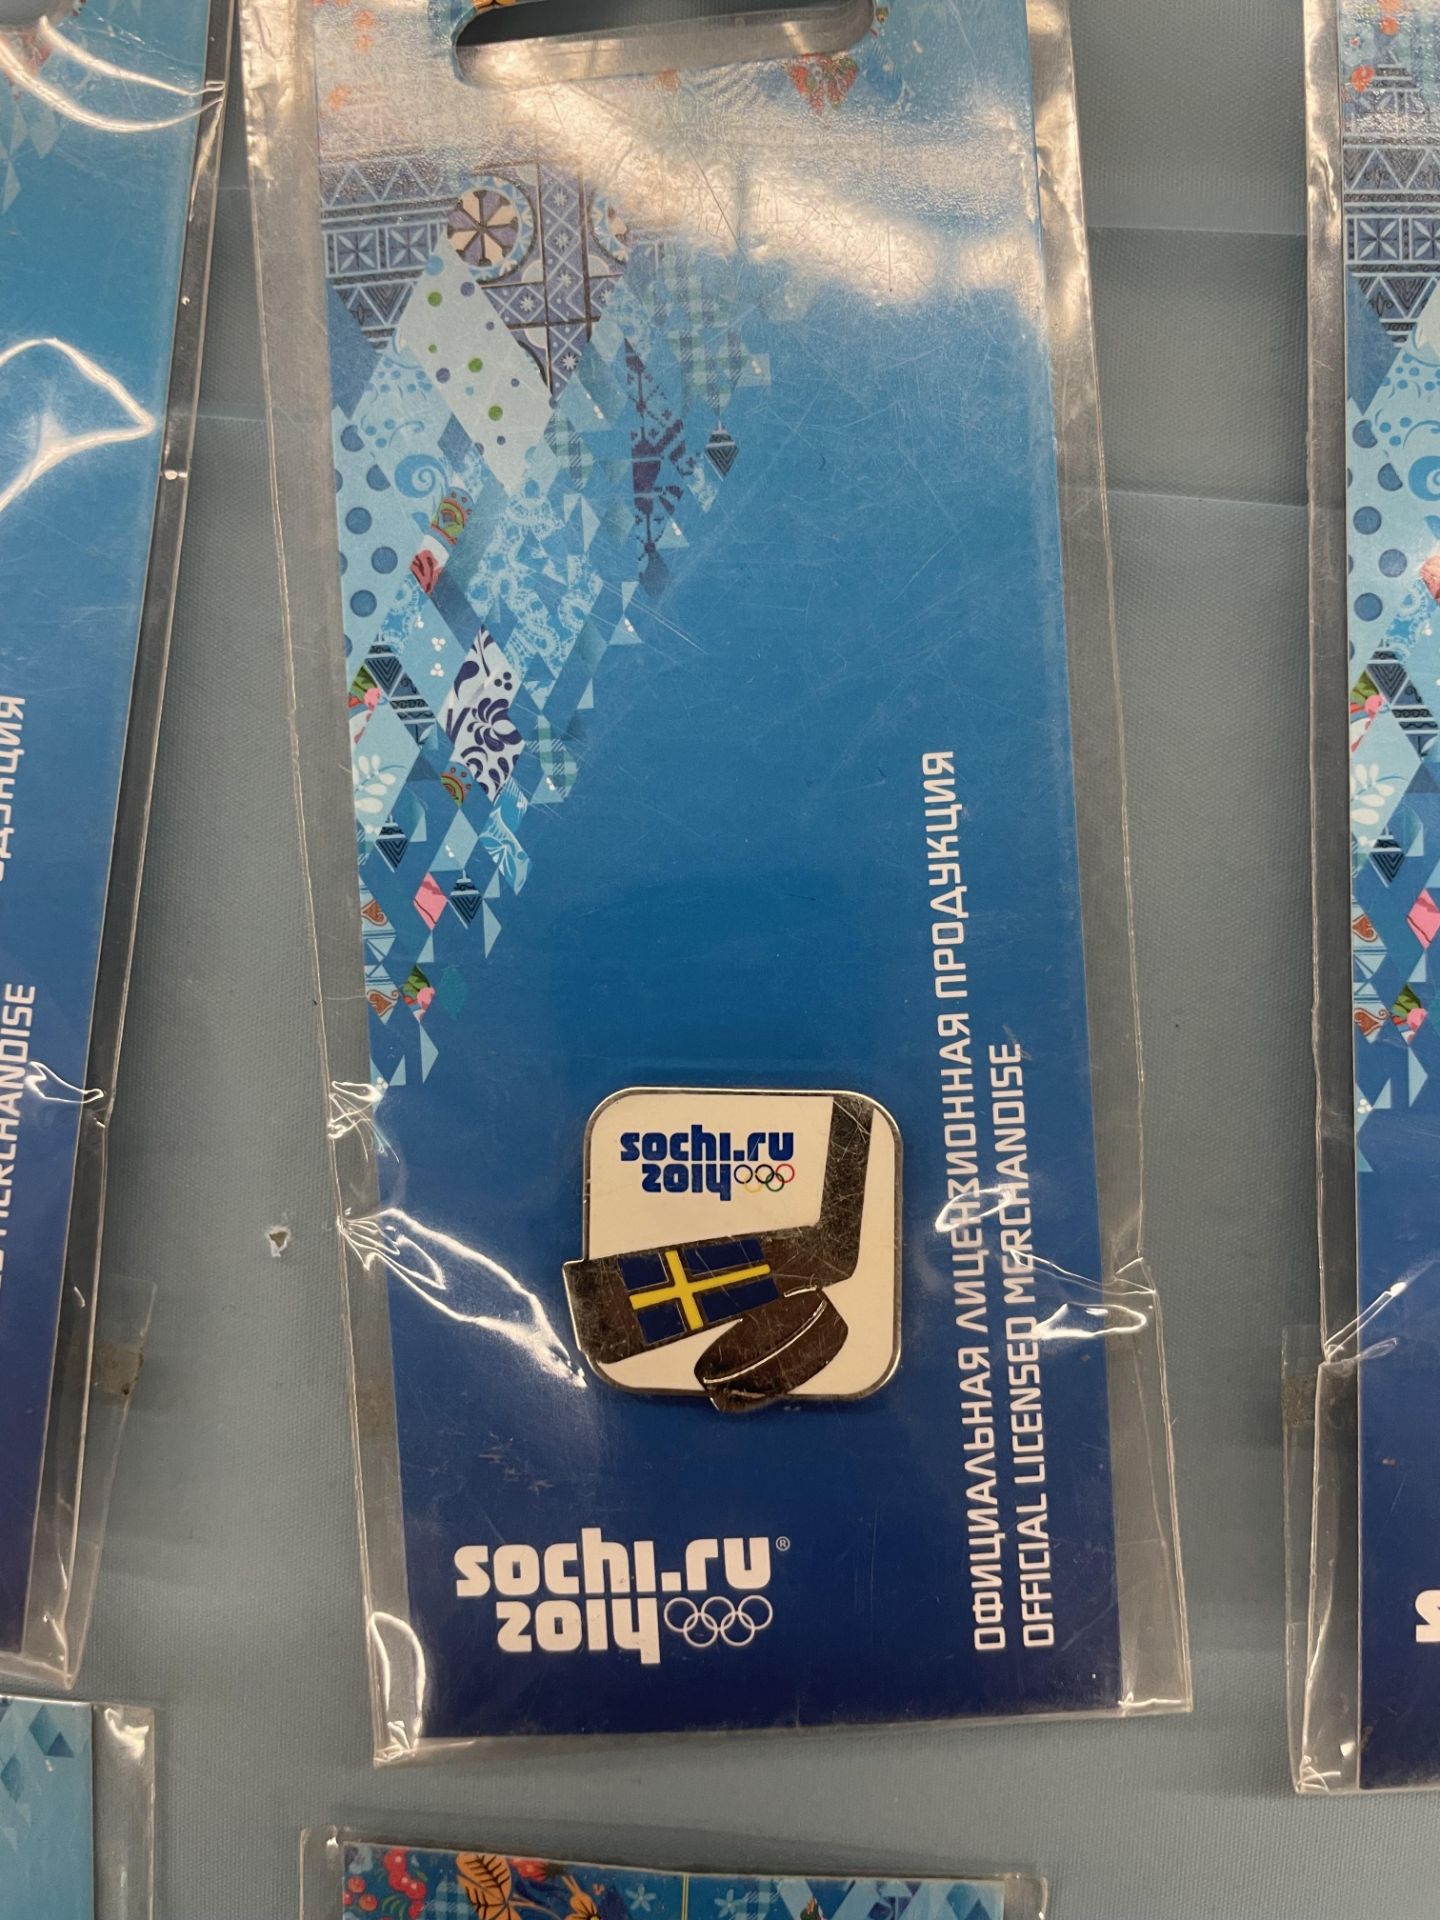 (Lot) (6) Sochi 2014 Russia Olympics Commemorative Pins ( USA, Finland, Russia Sweden, (2) Olympic ) - Image 6 of 8